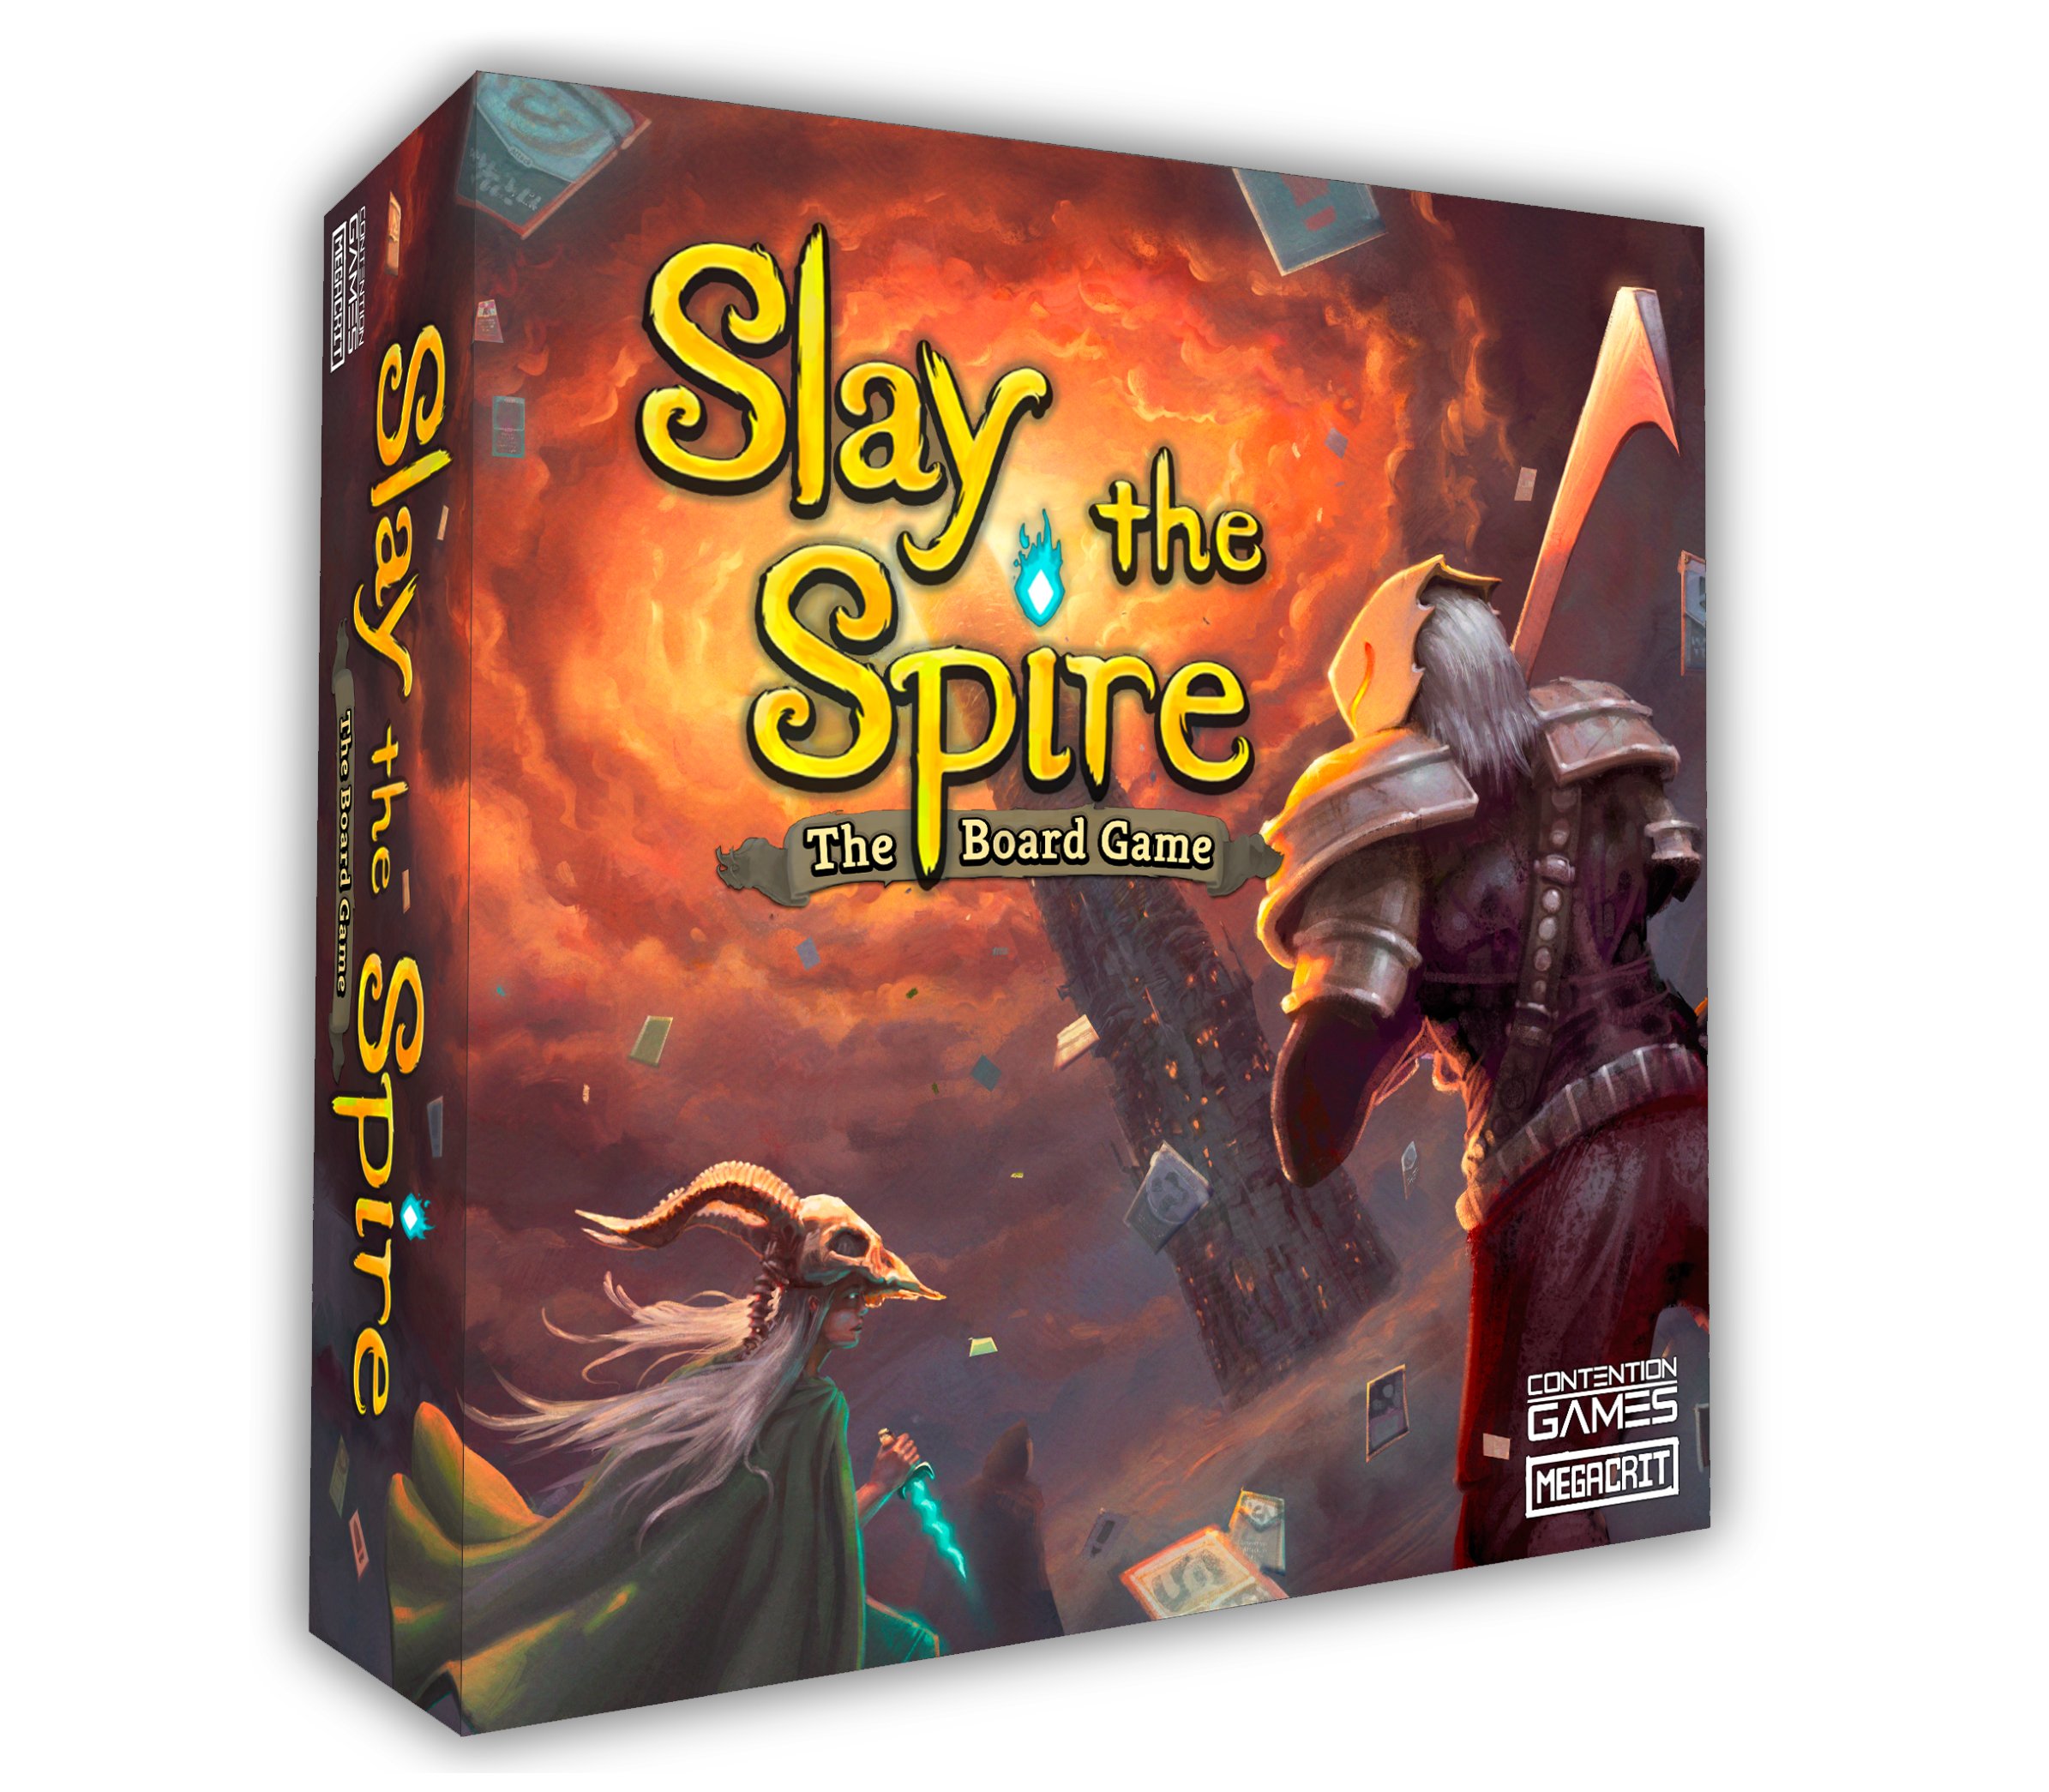 games like slay the spire and darkest dungeon